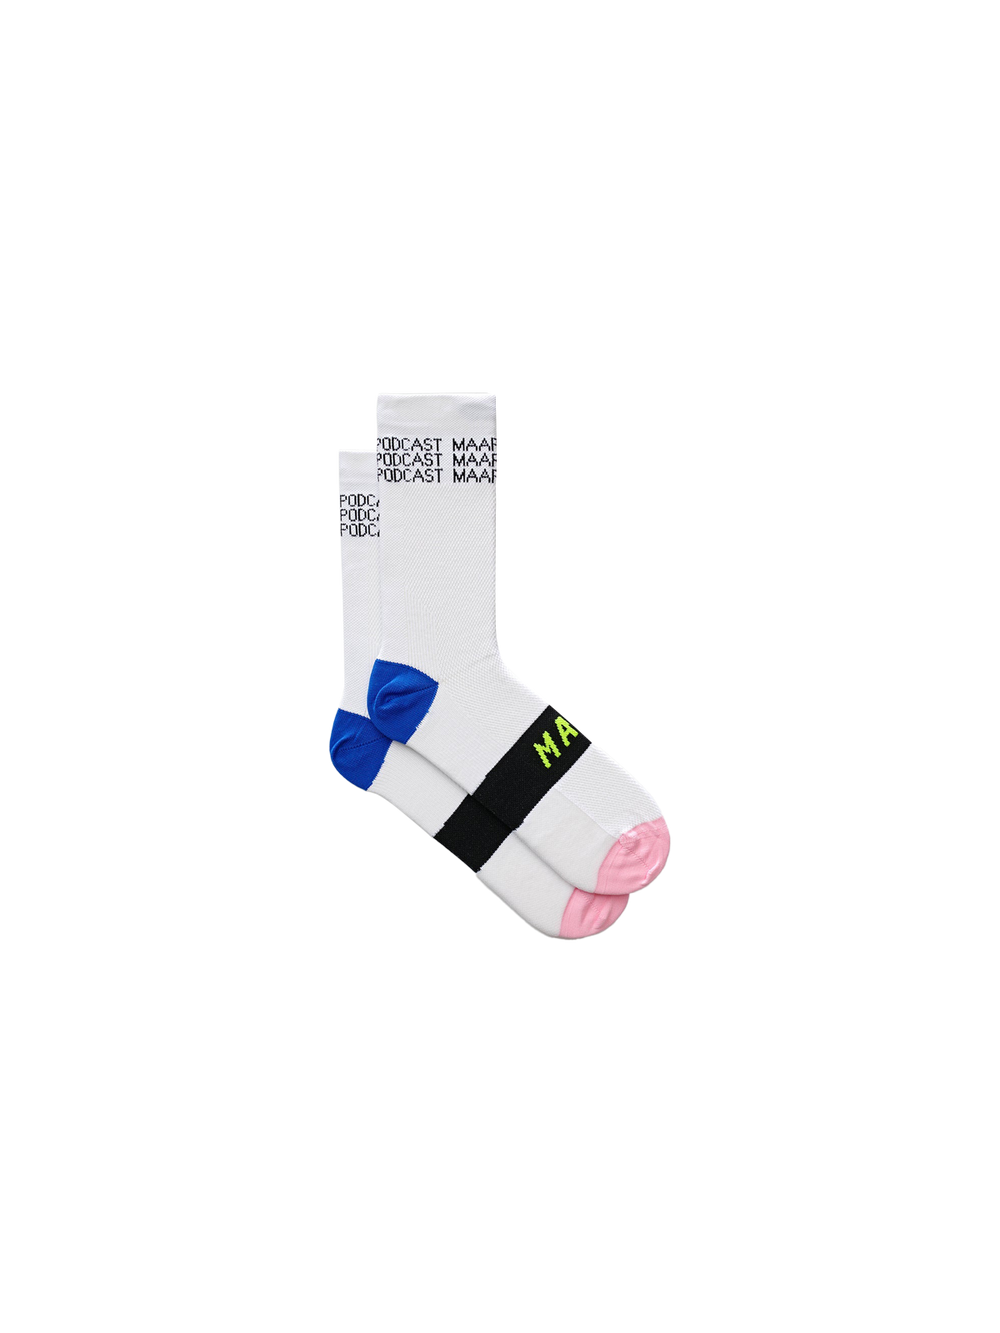 Product Image for MAAP x The Cycling Podcast Sock